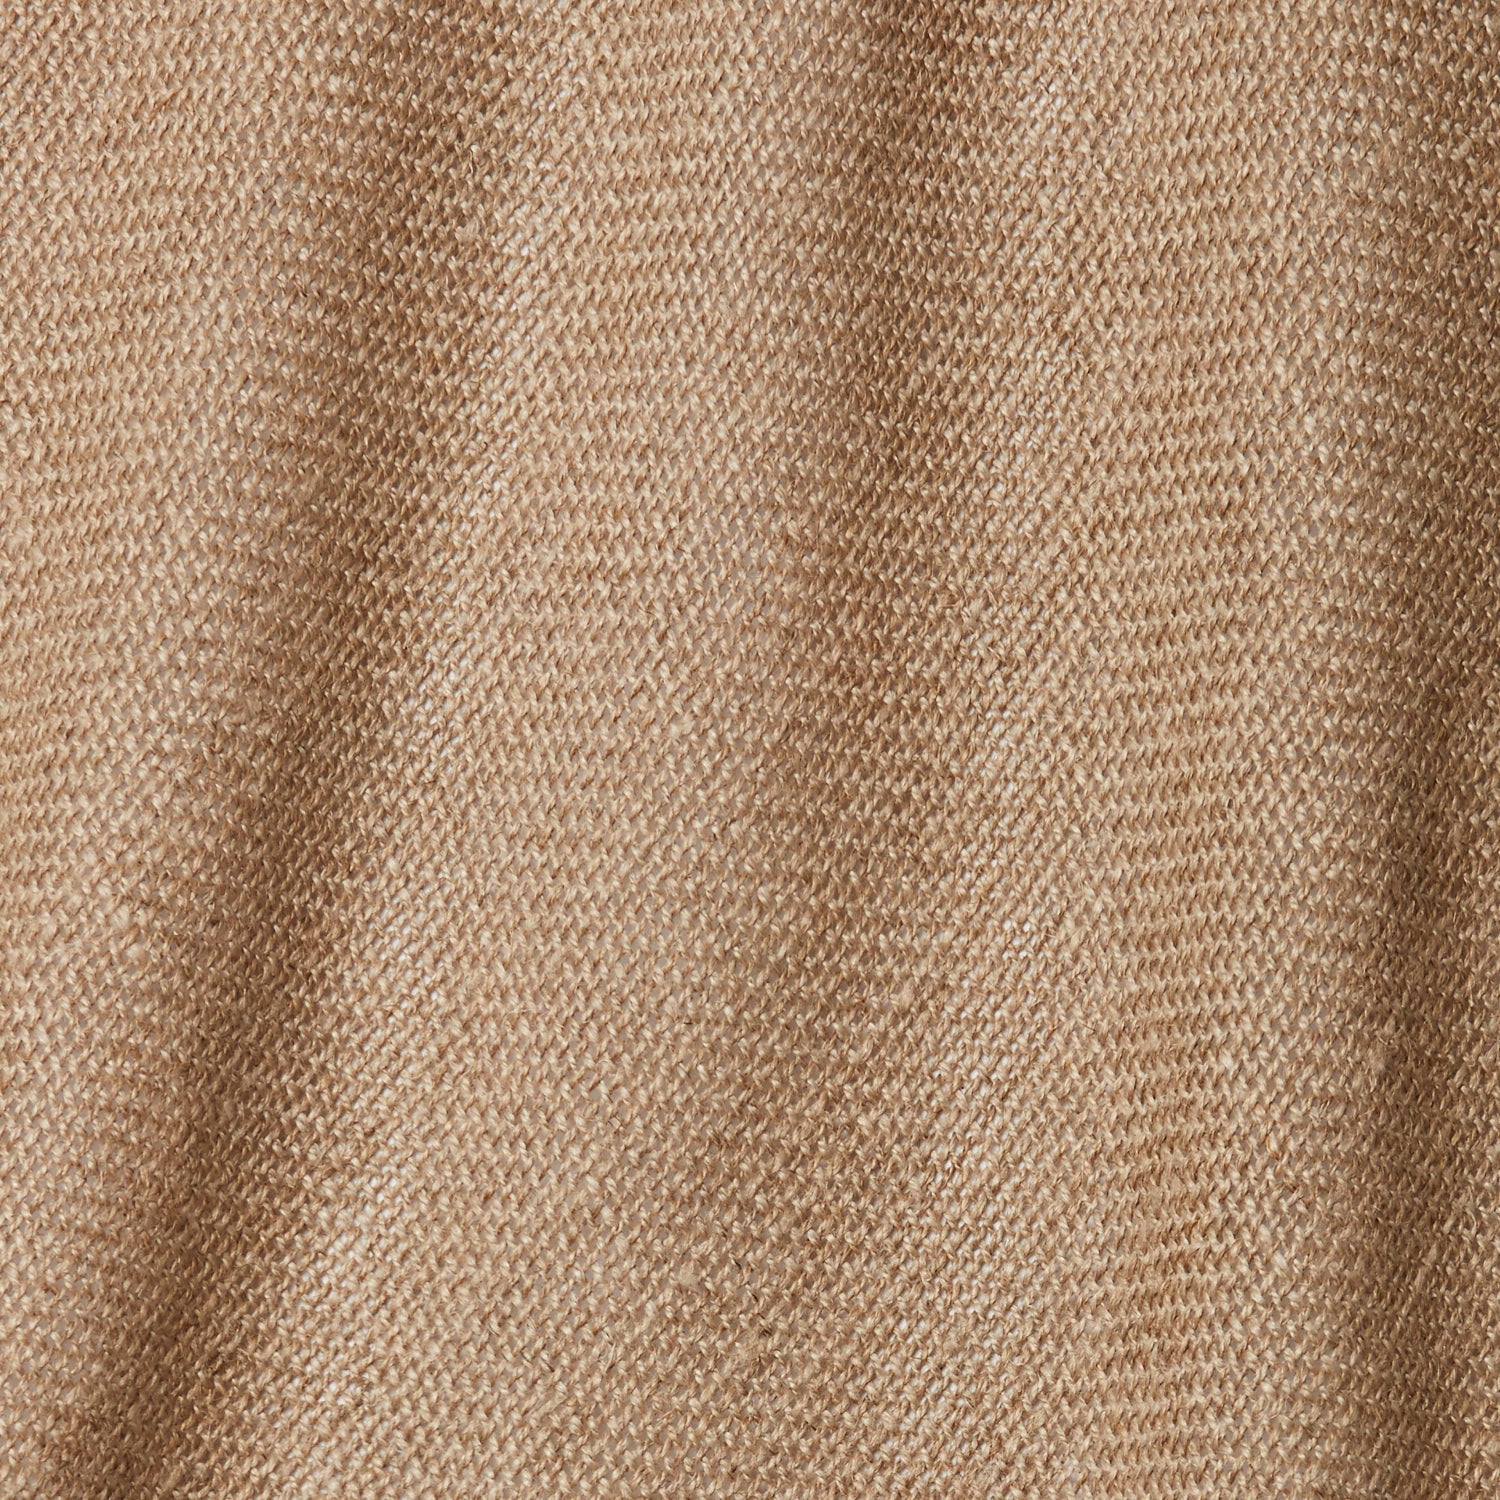 A draped swatch of open-weave sheer interior fabric in a tan color.